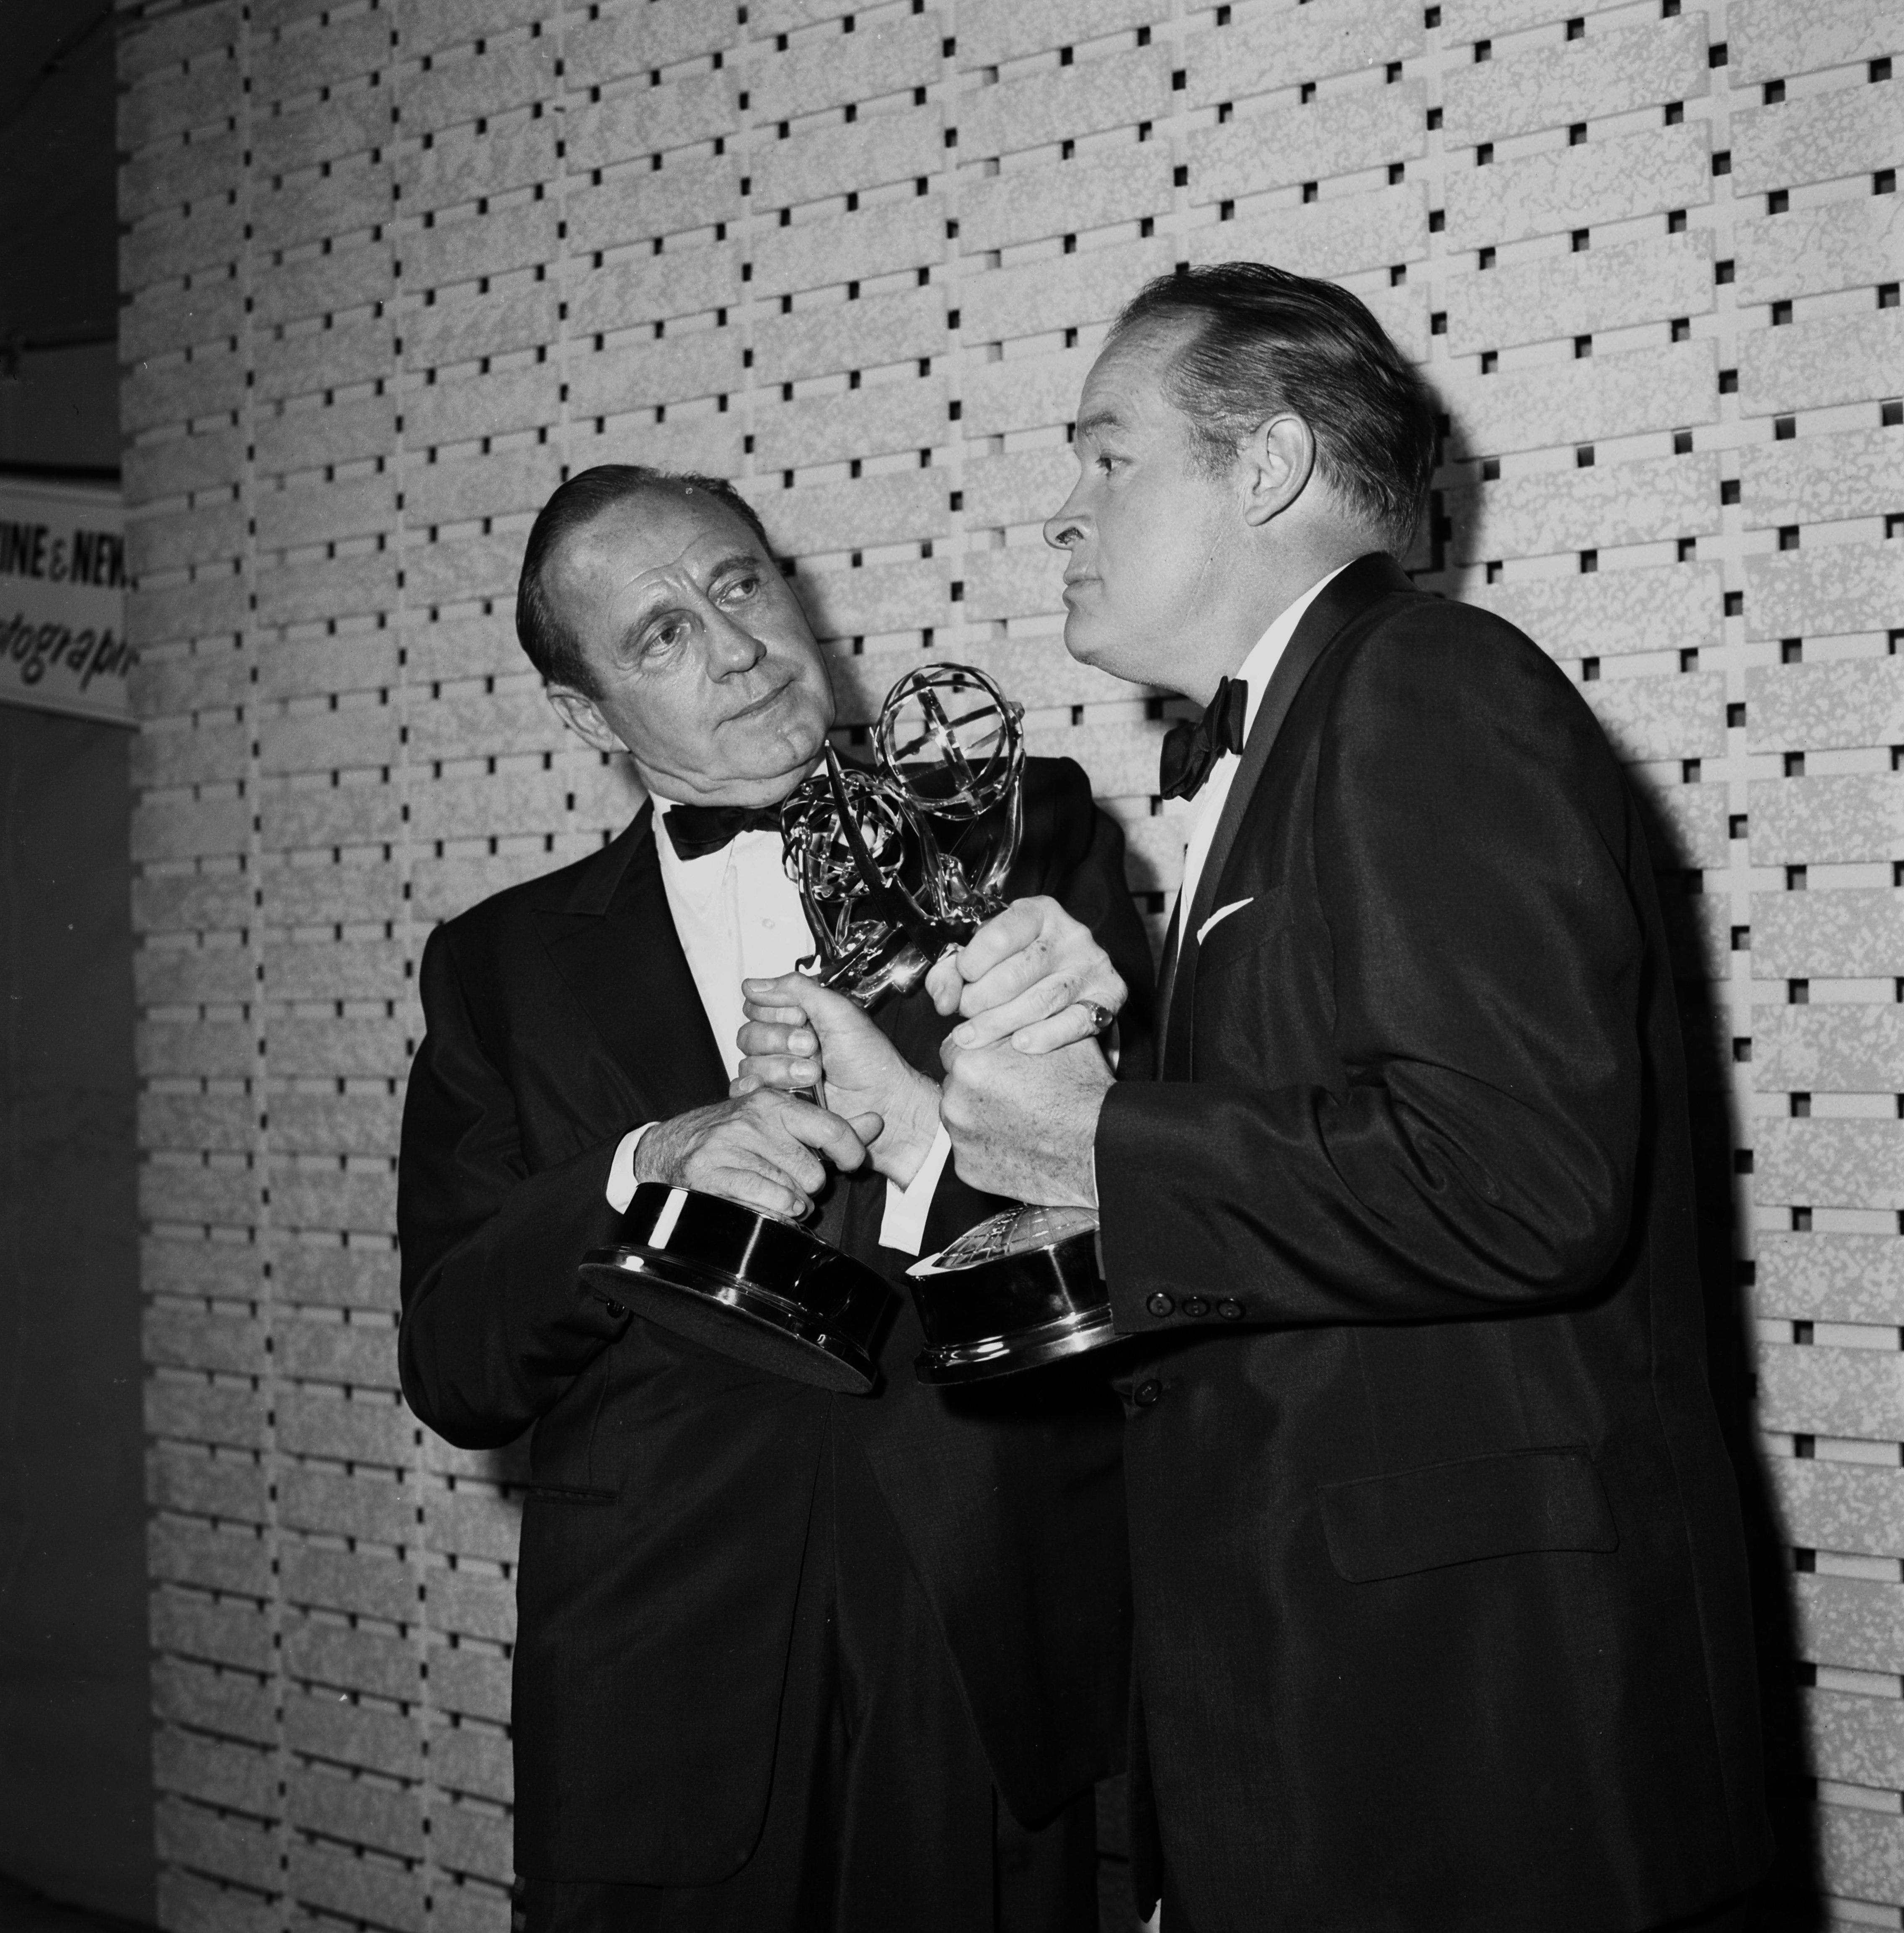 Actor Bob Hope with Jack Benny as he grabs his Golden Globe Award in Los Angeles, California circa 1958 | Source: Getty Images